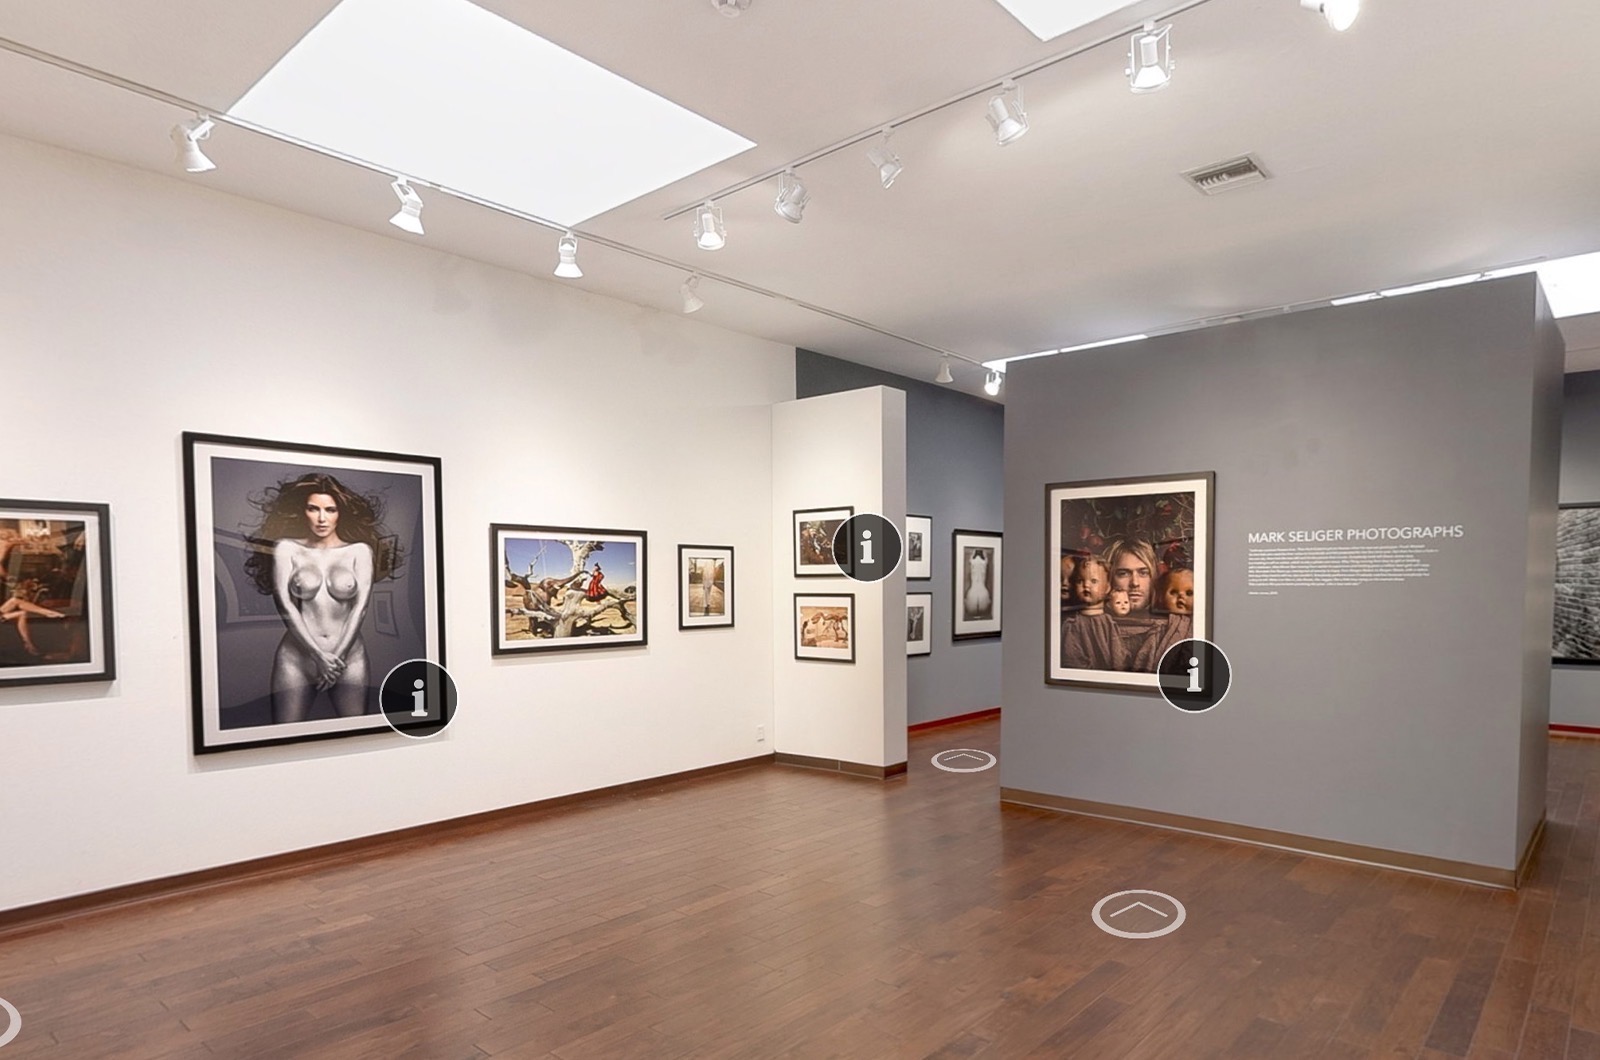 360 Virtual Tours for Art Galleries